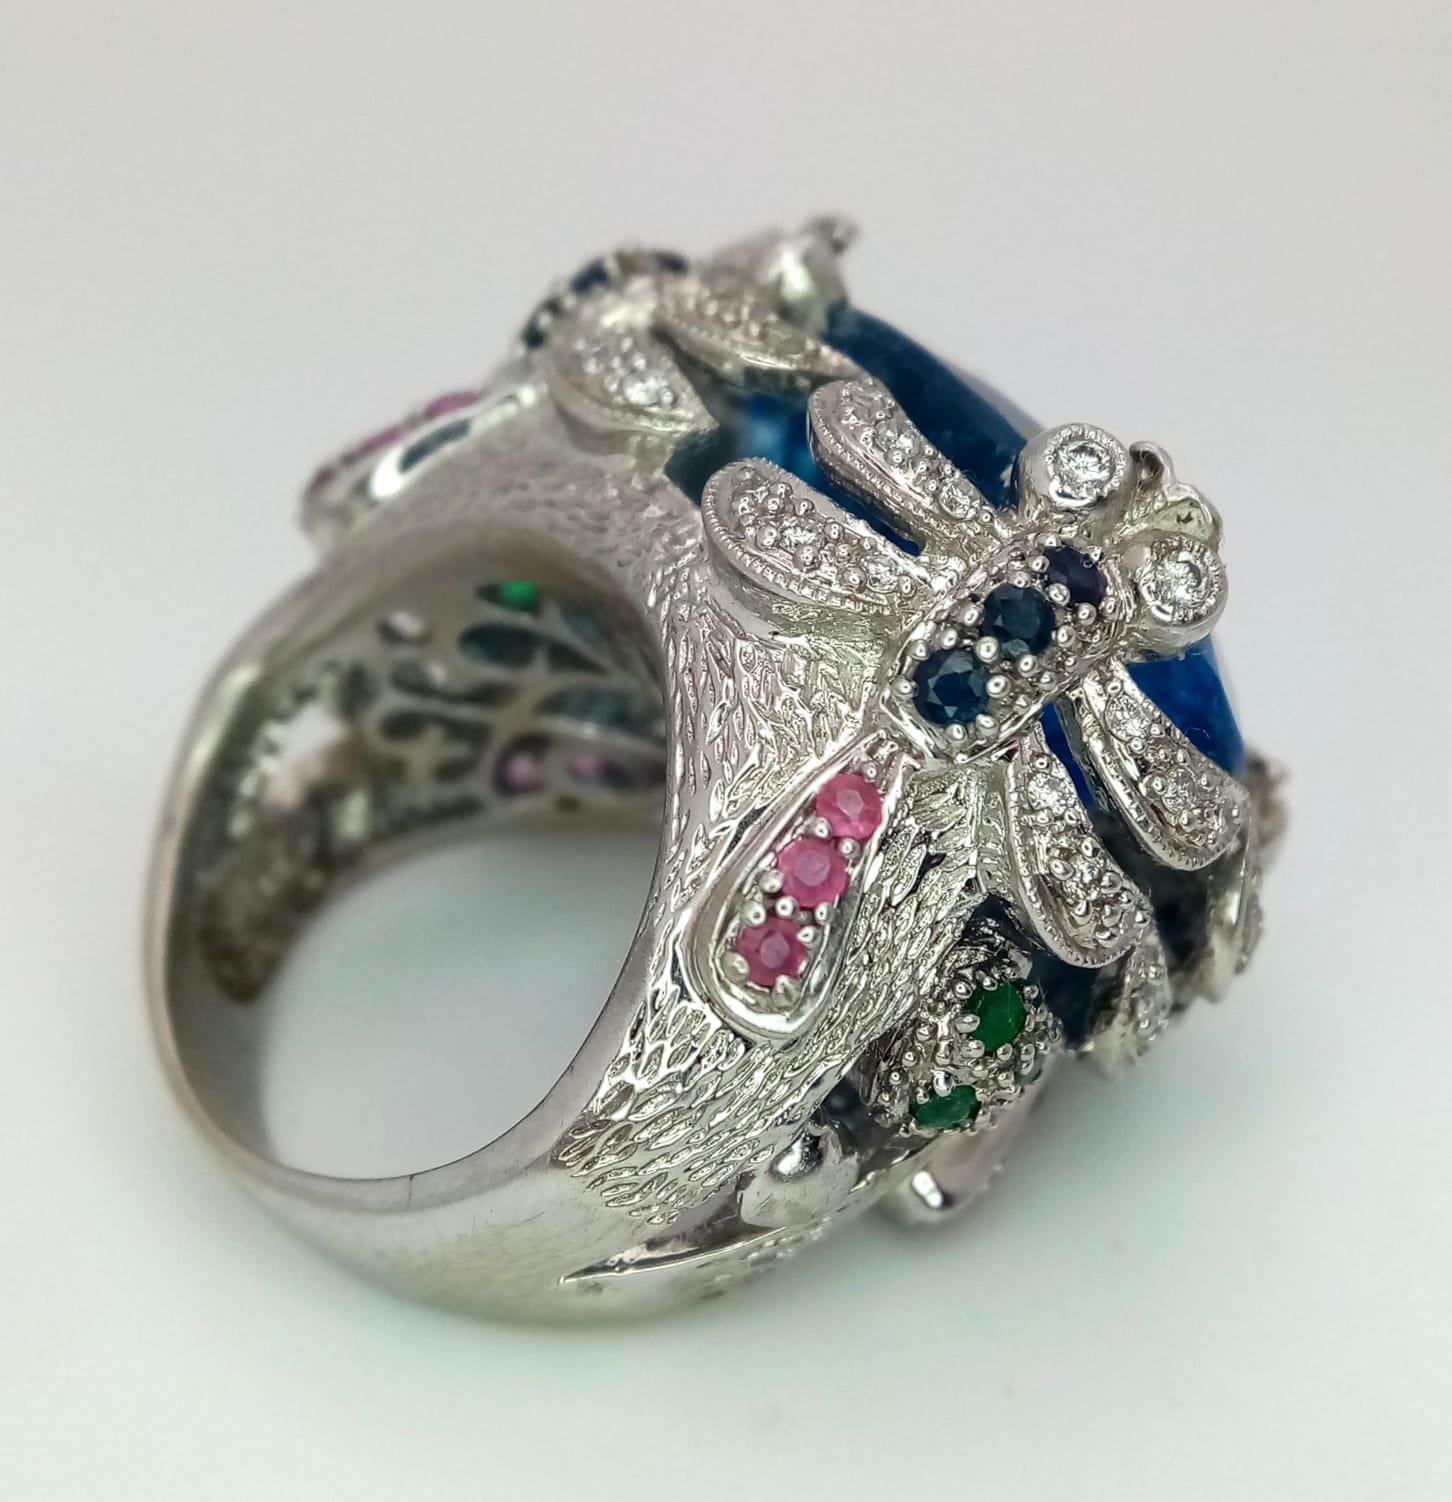 An 18kt White Gold Exquisite Fancy Cocktail Ring Set with Diamonds, Rubies, Sapphires & Emeralds - Image 4 of 10